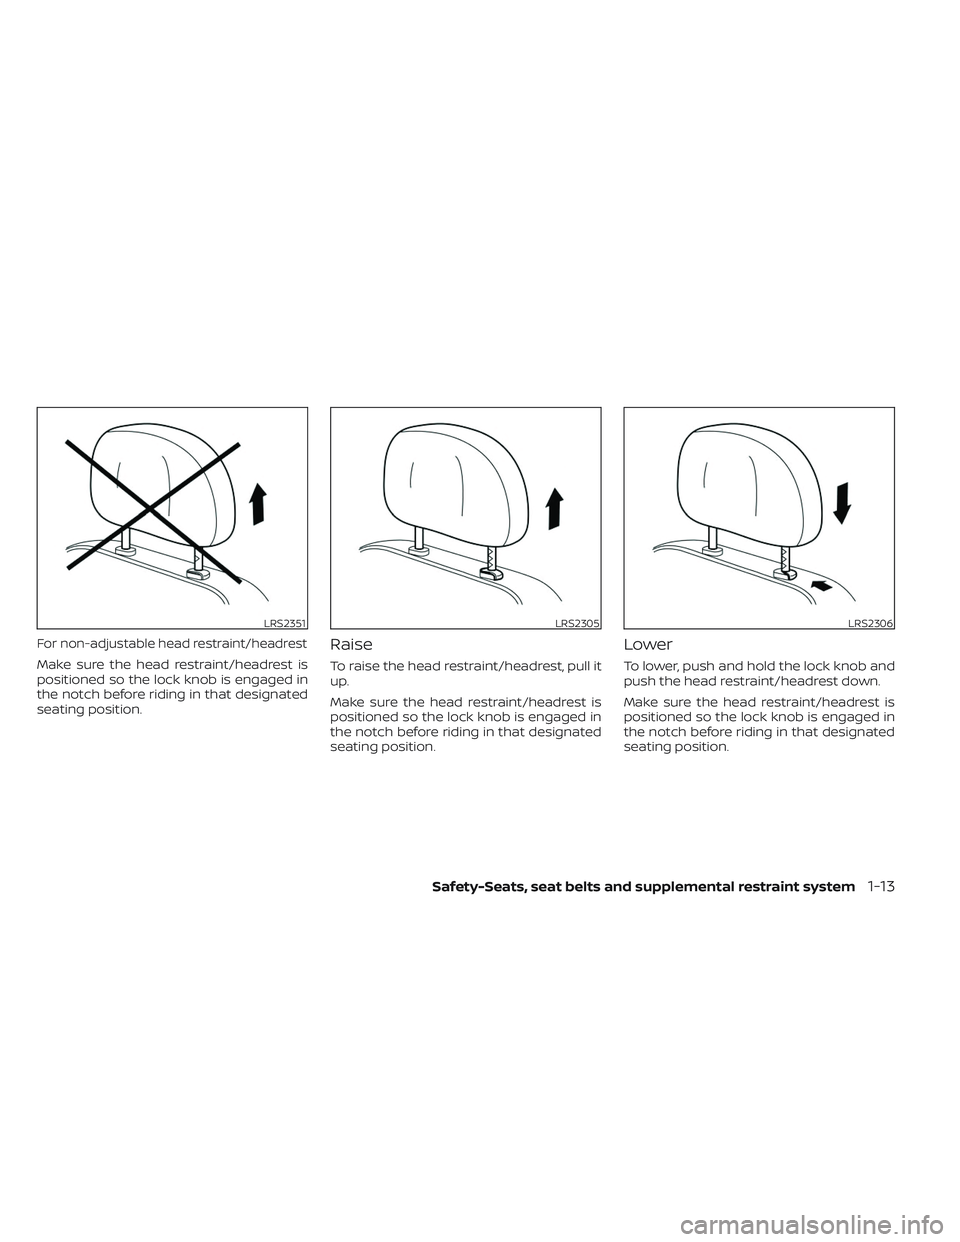 NISSAN FRONTIER 2023 Owners Guide For non-adjustable head restraint/headrest
Make sure the head restraint/headrest is
positioned so the lock knob is engaged in
the notch before riding in that designated
seating position.
Raise
To rais